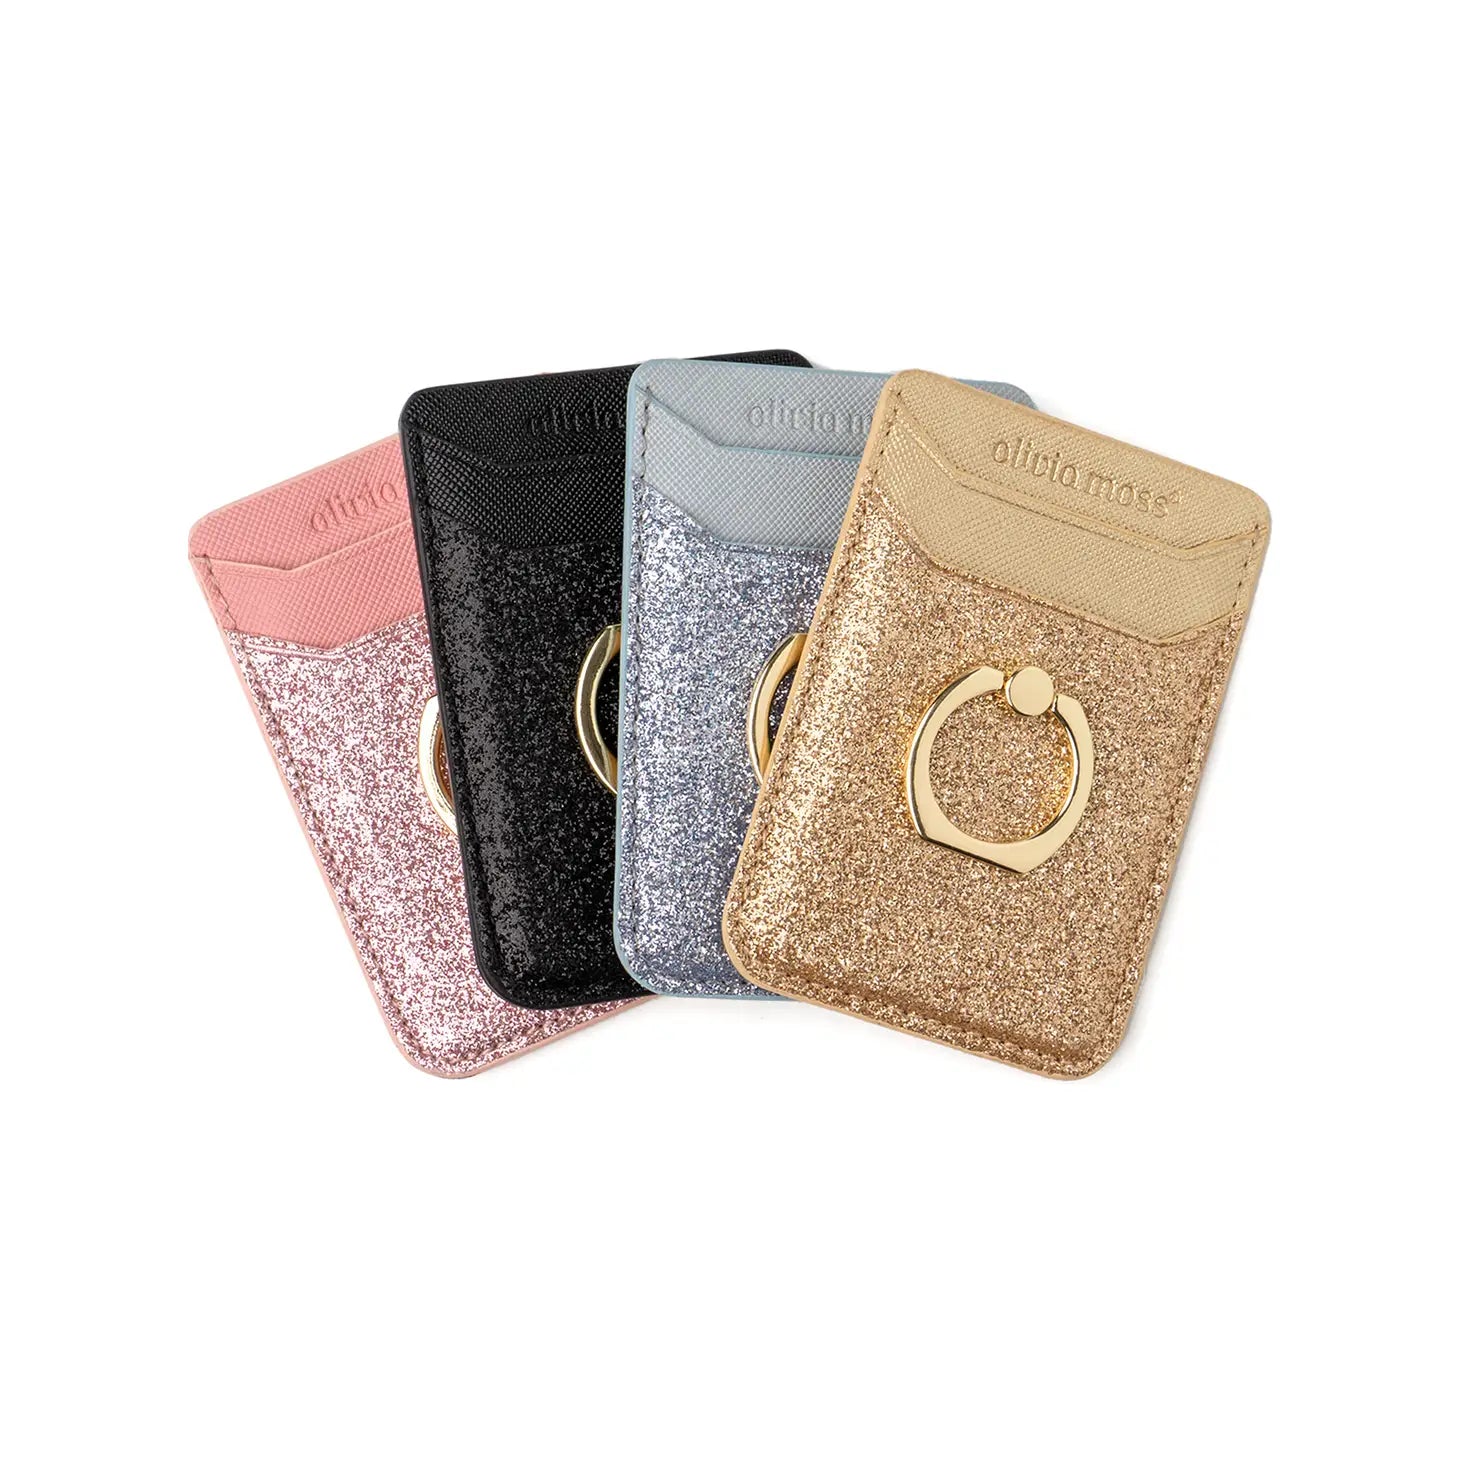 Glitter Bomb Ring Cling Phone Wallet